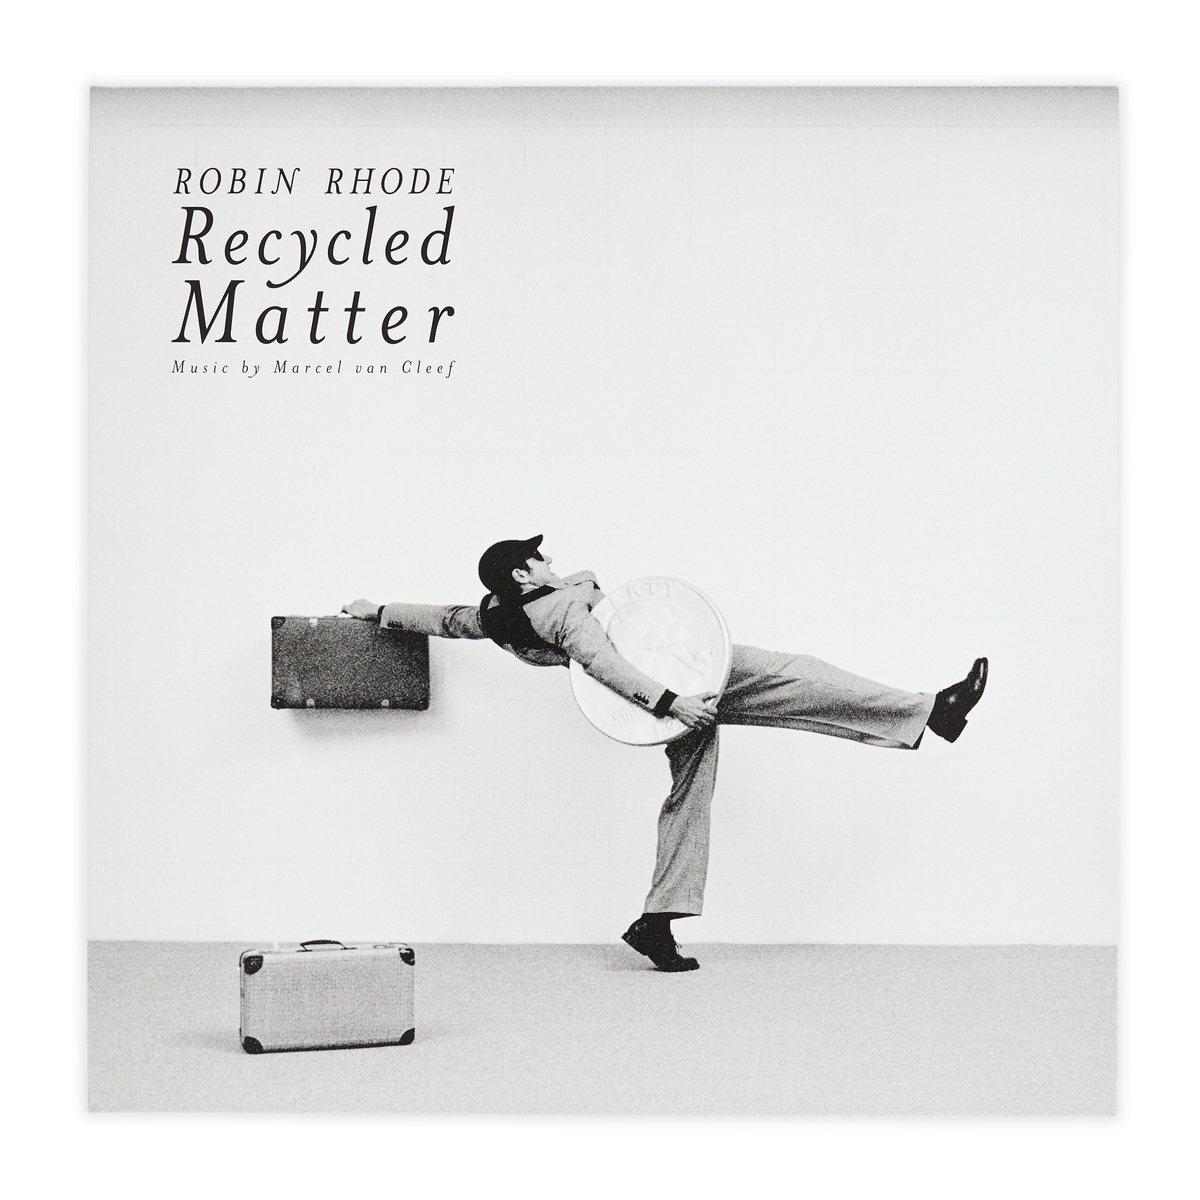 Photograph of the cover of Robin Rhode's 12" vinyl record 'Recycled Matter'.
